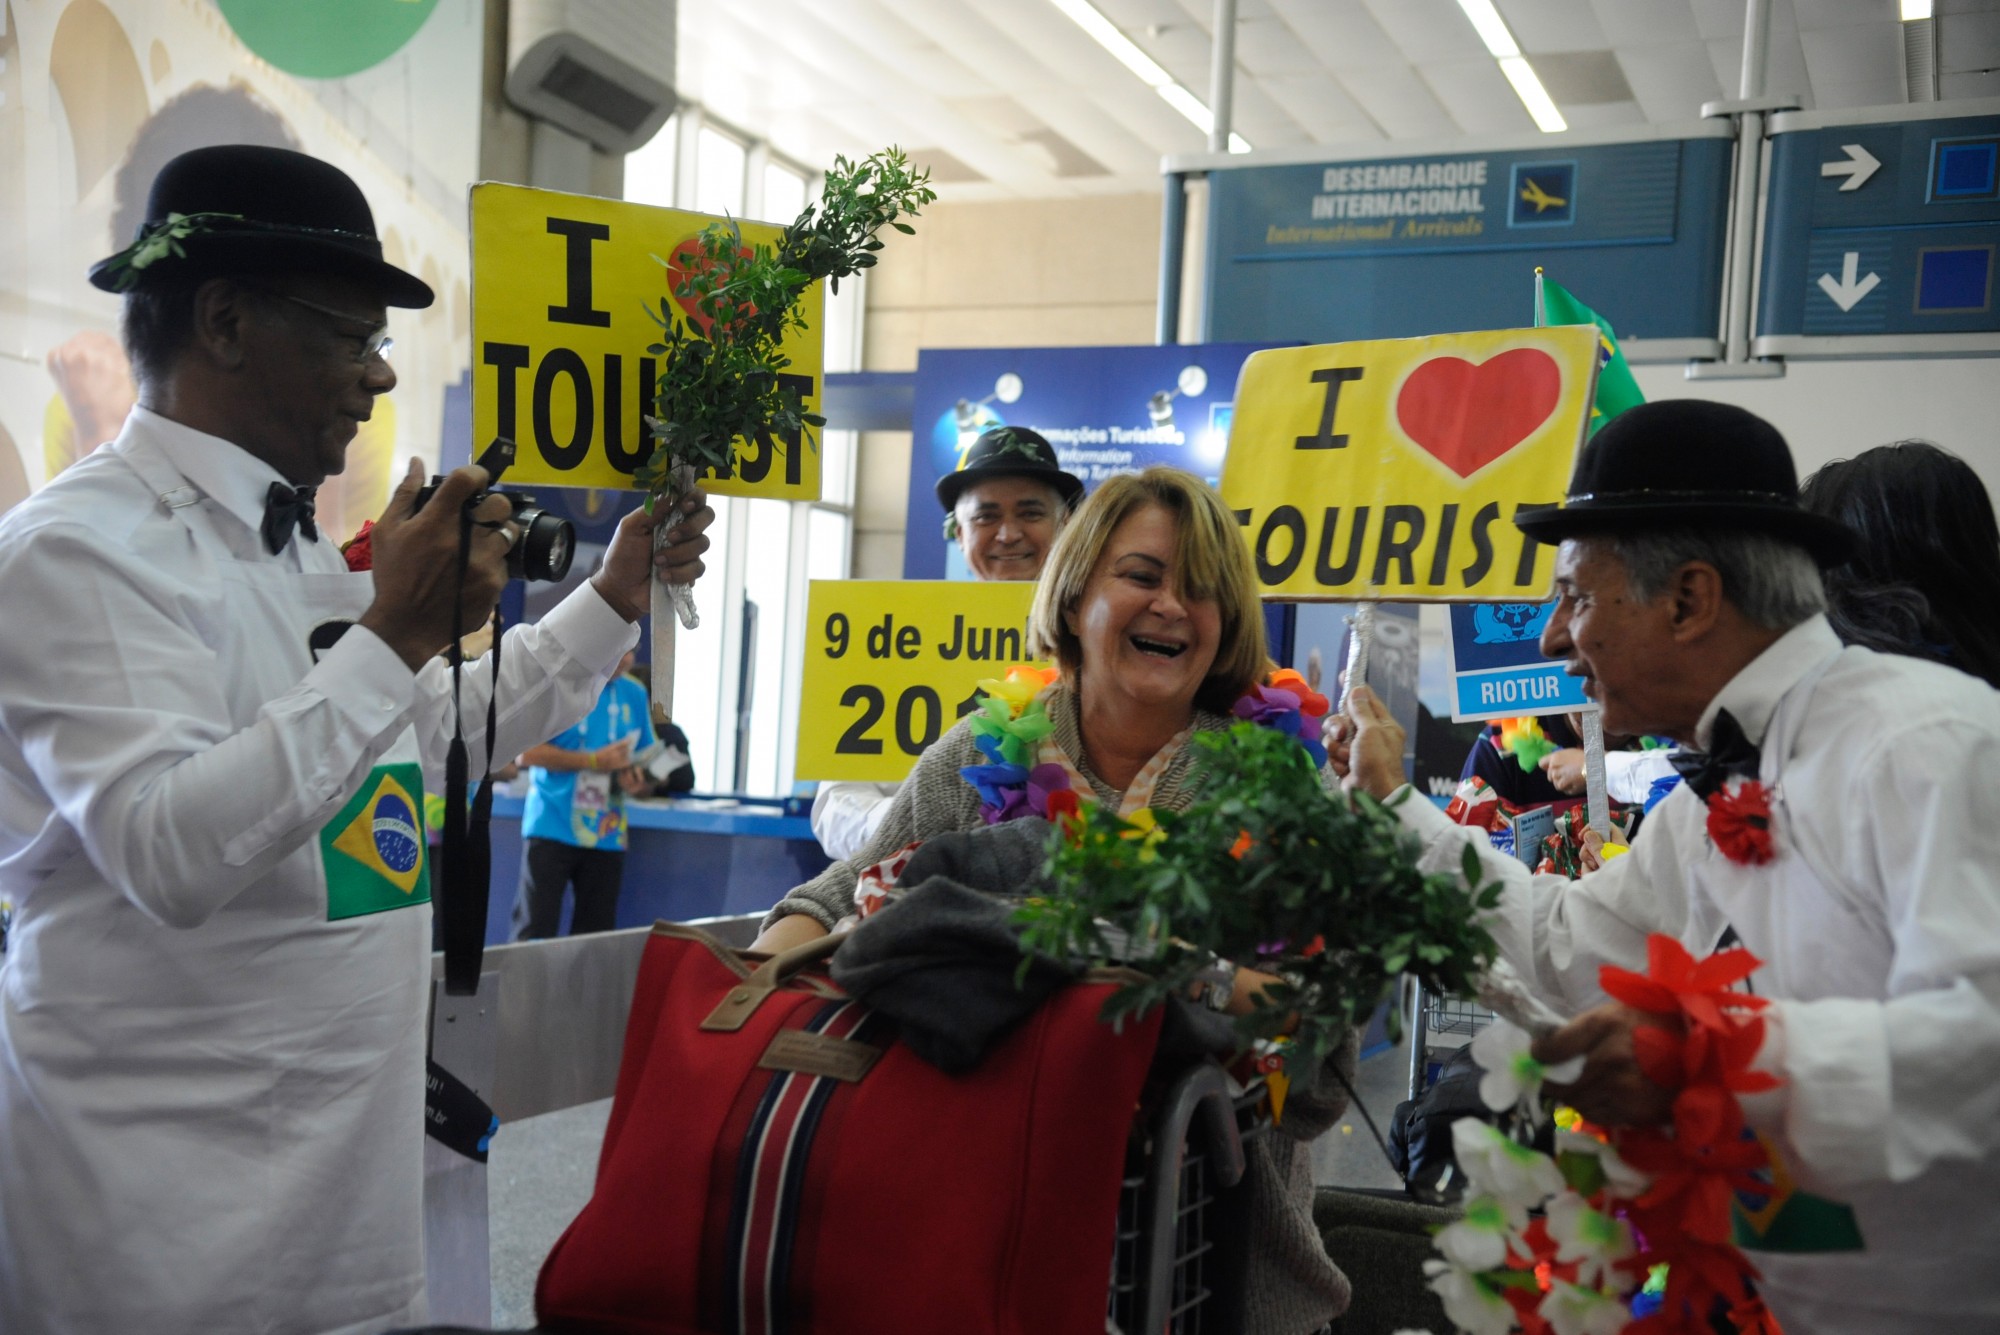 Brazil, Thousands of tourists came to Brazil for 2016 Olympics/Paralympics,